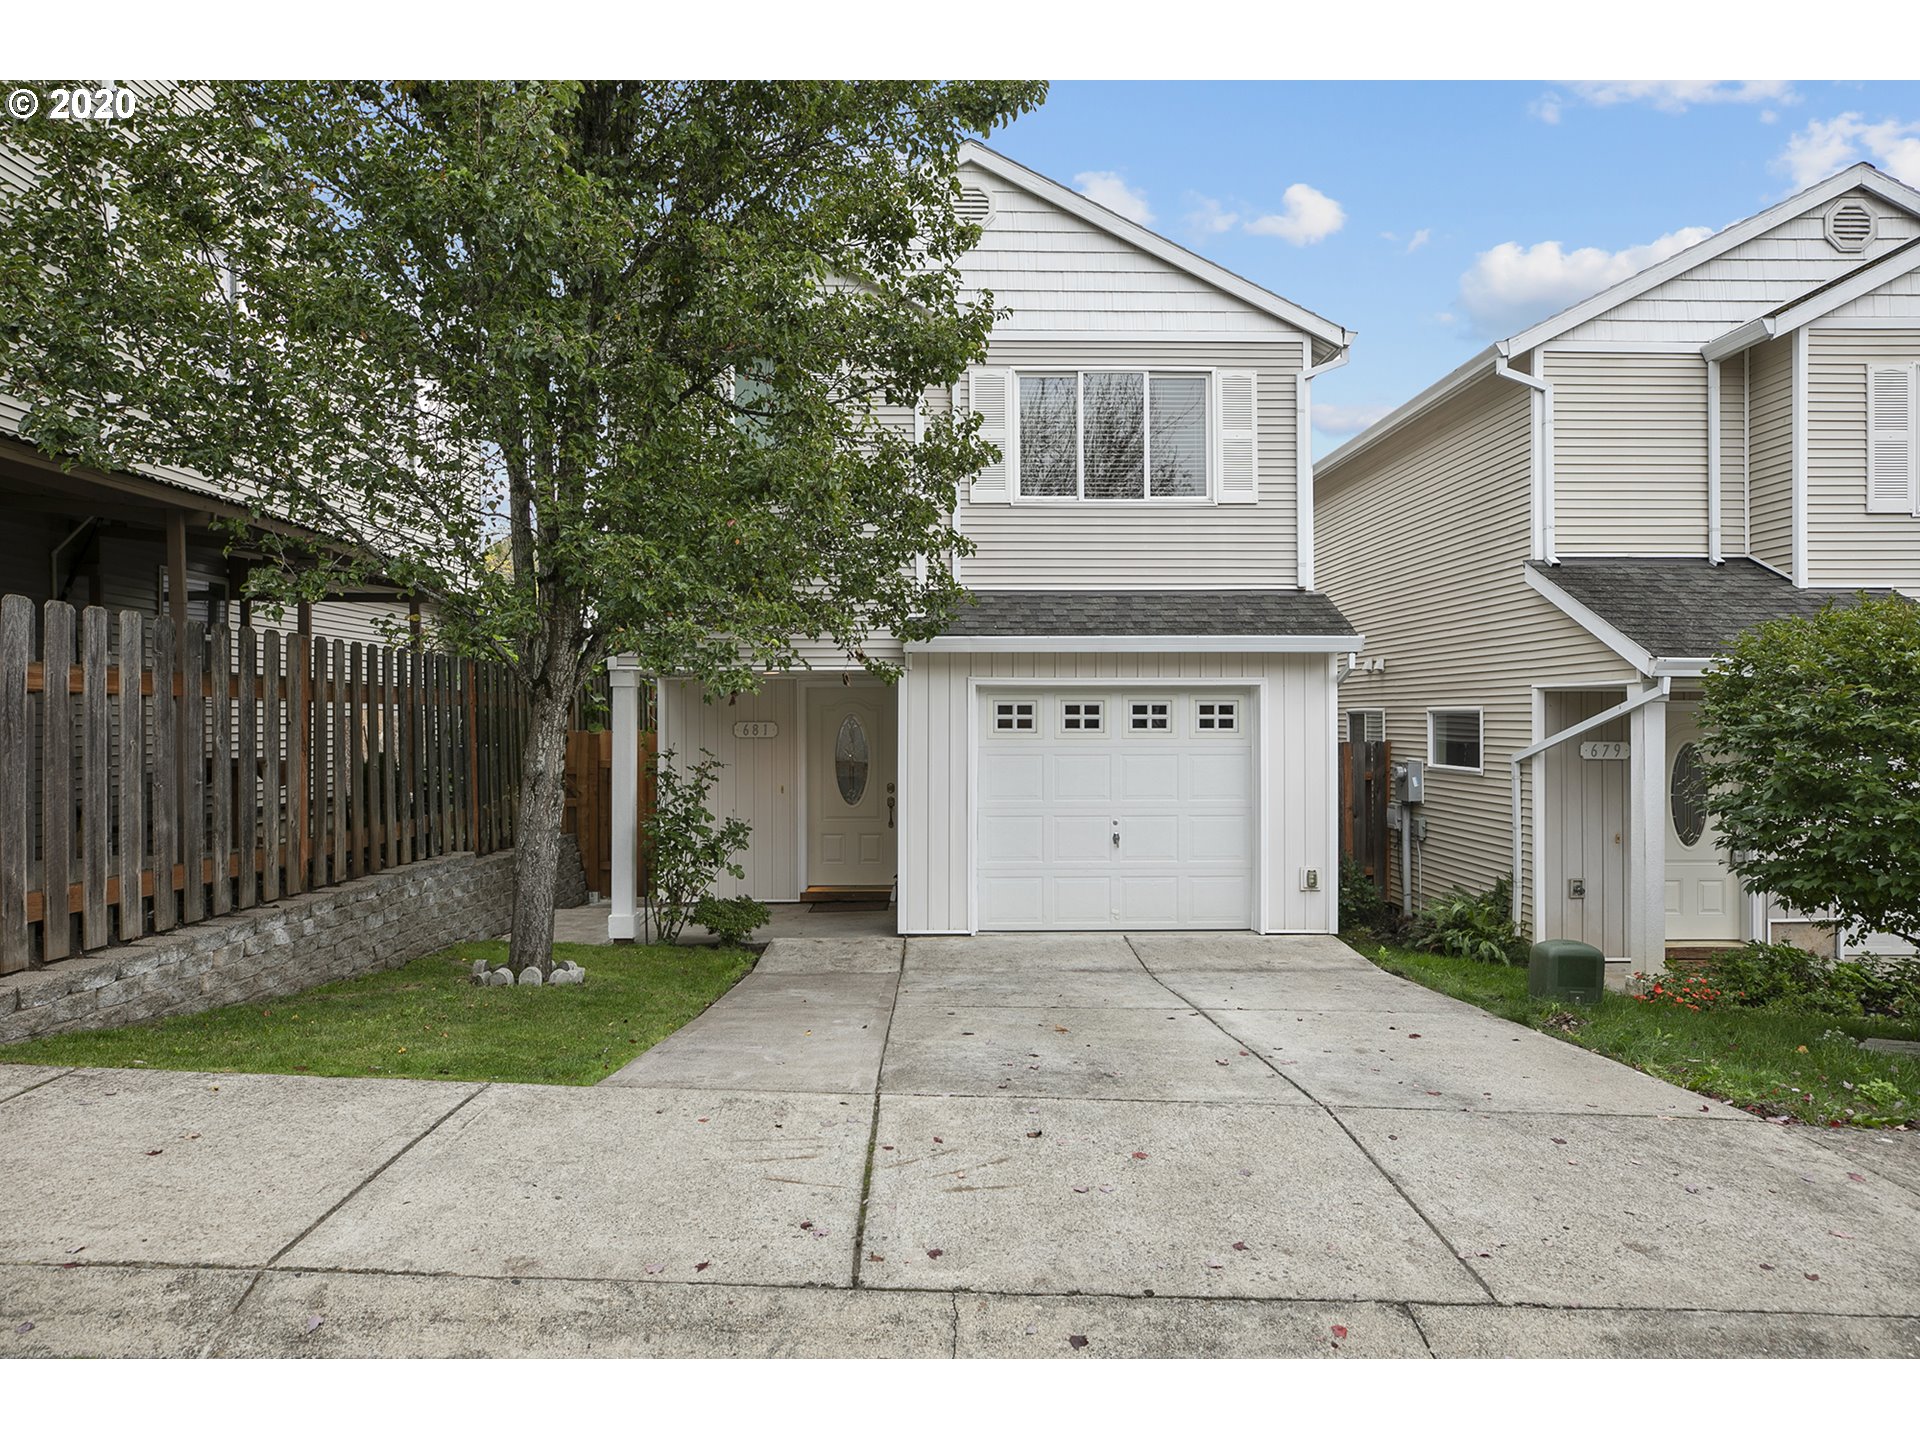 681 SE 148TH AVE (1 of 29)